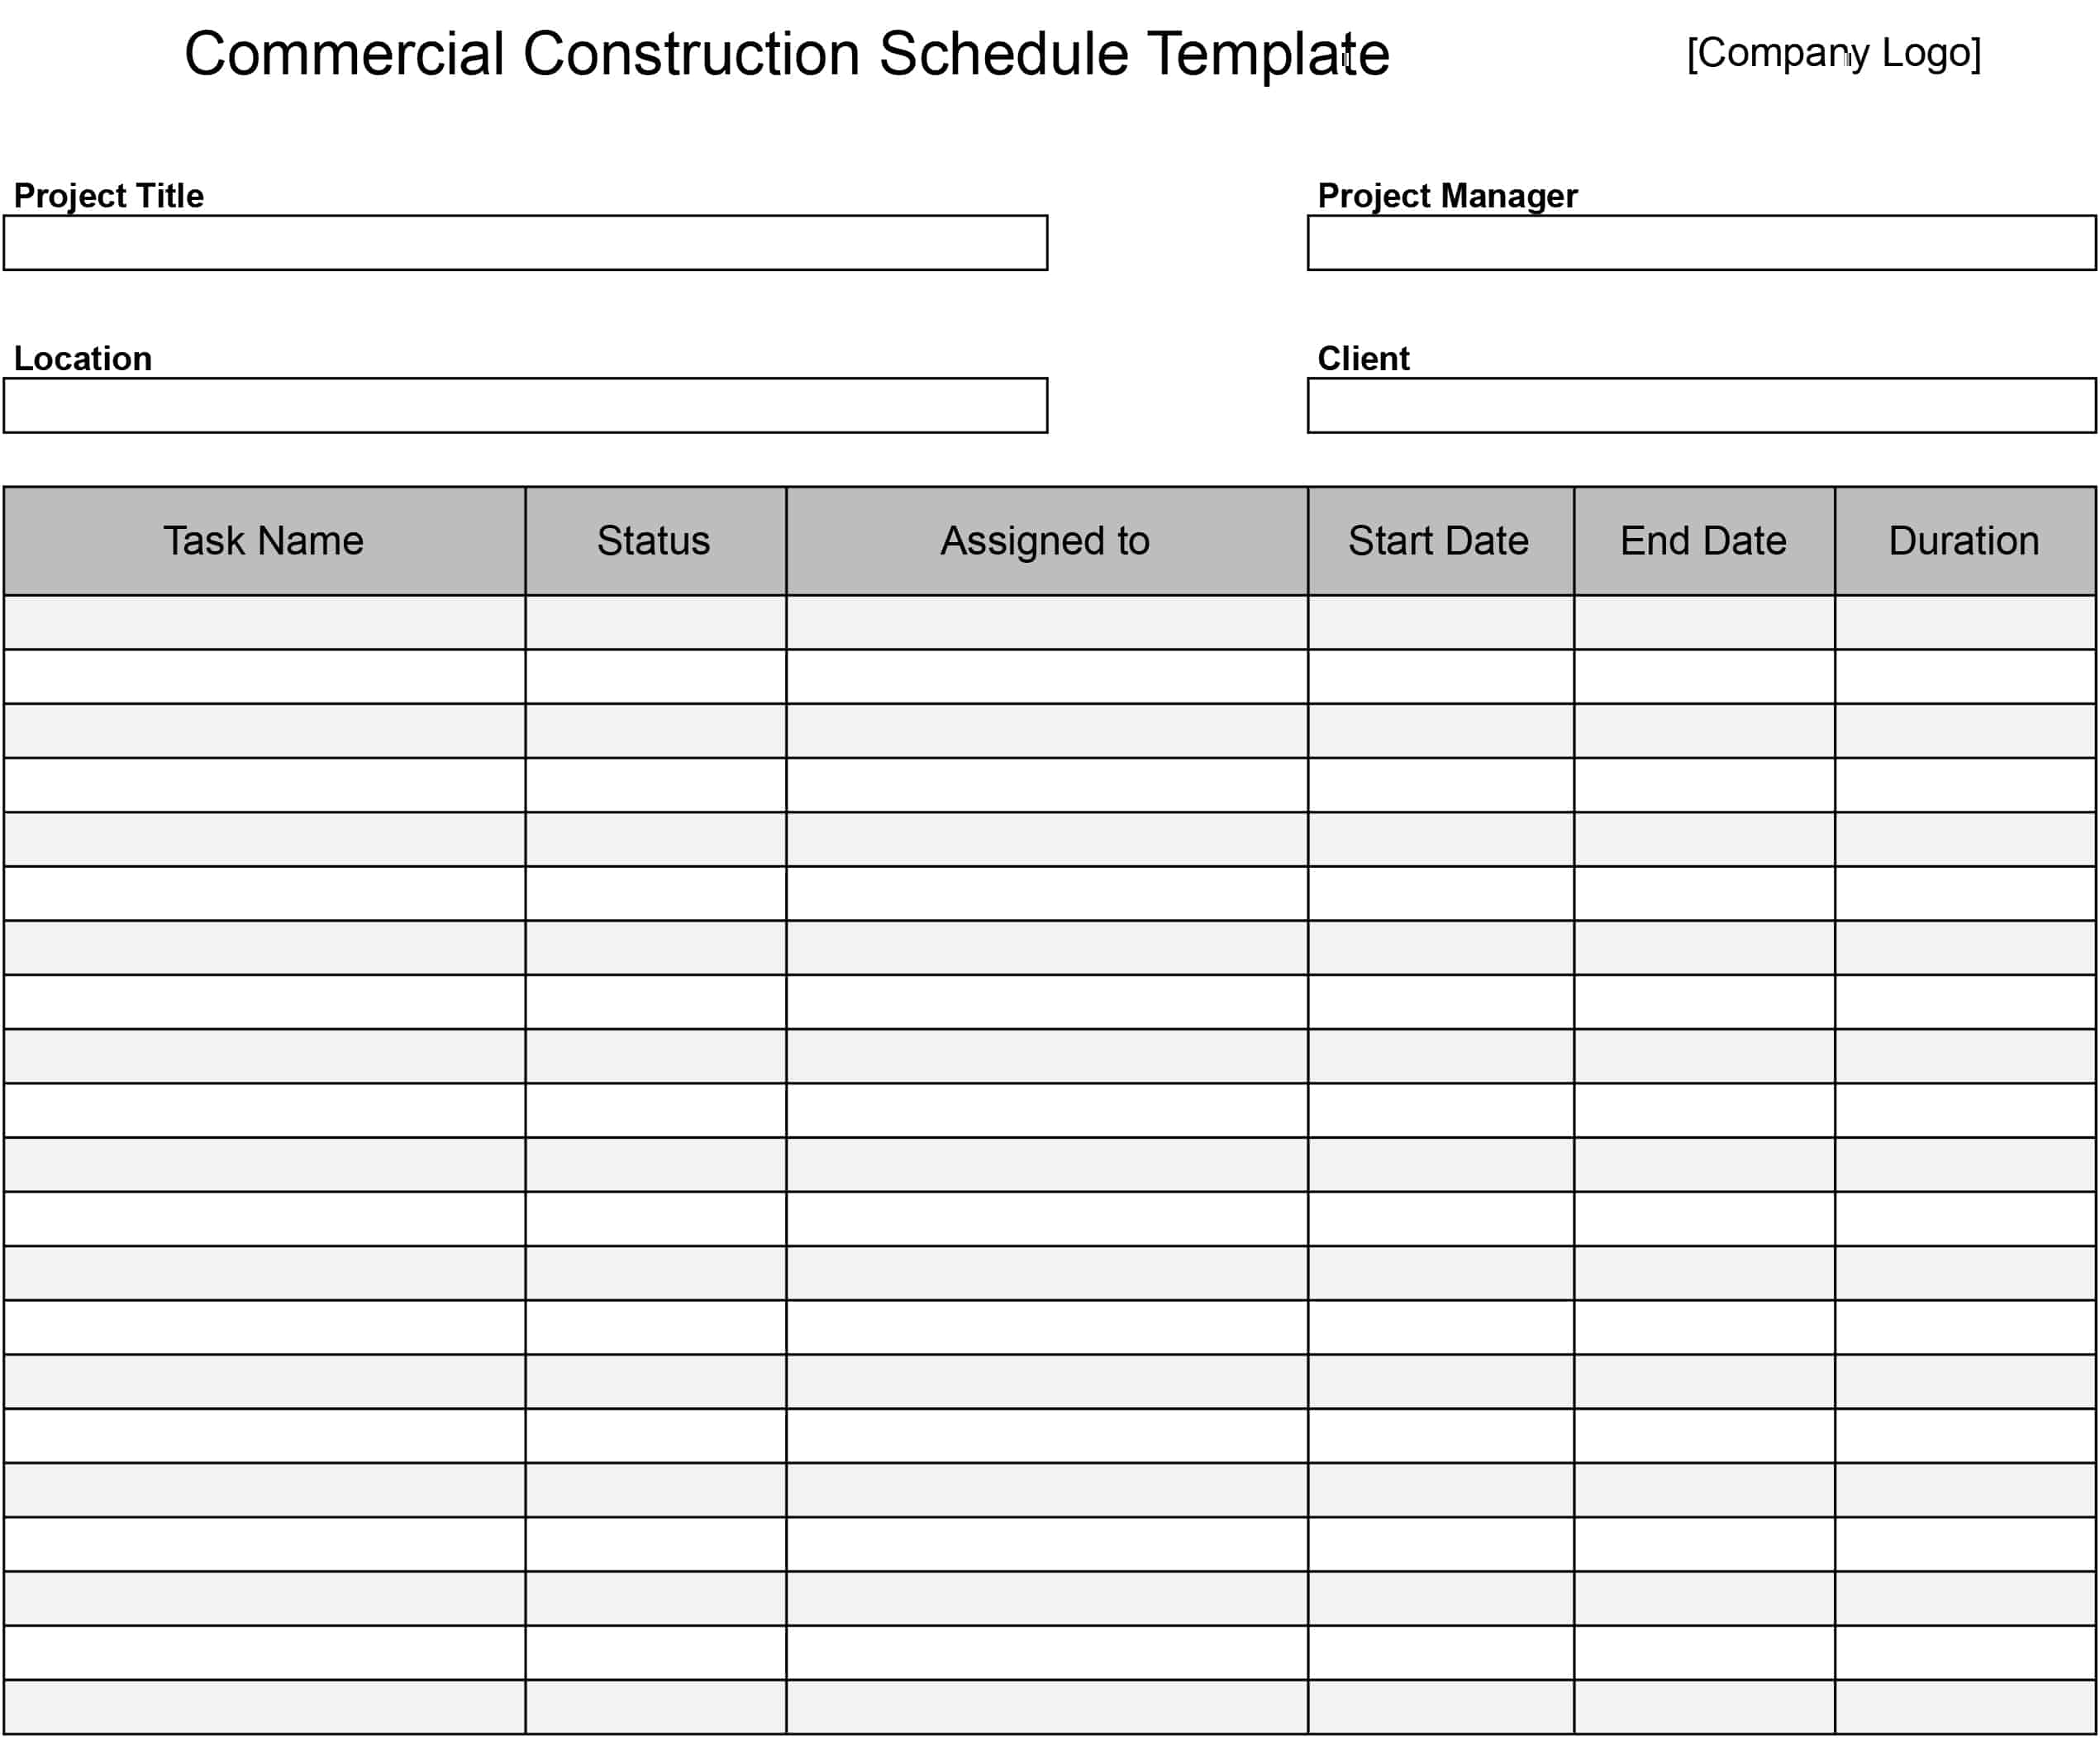 Construction Schedule Templates: Download & Print for Free!